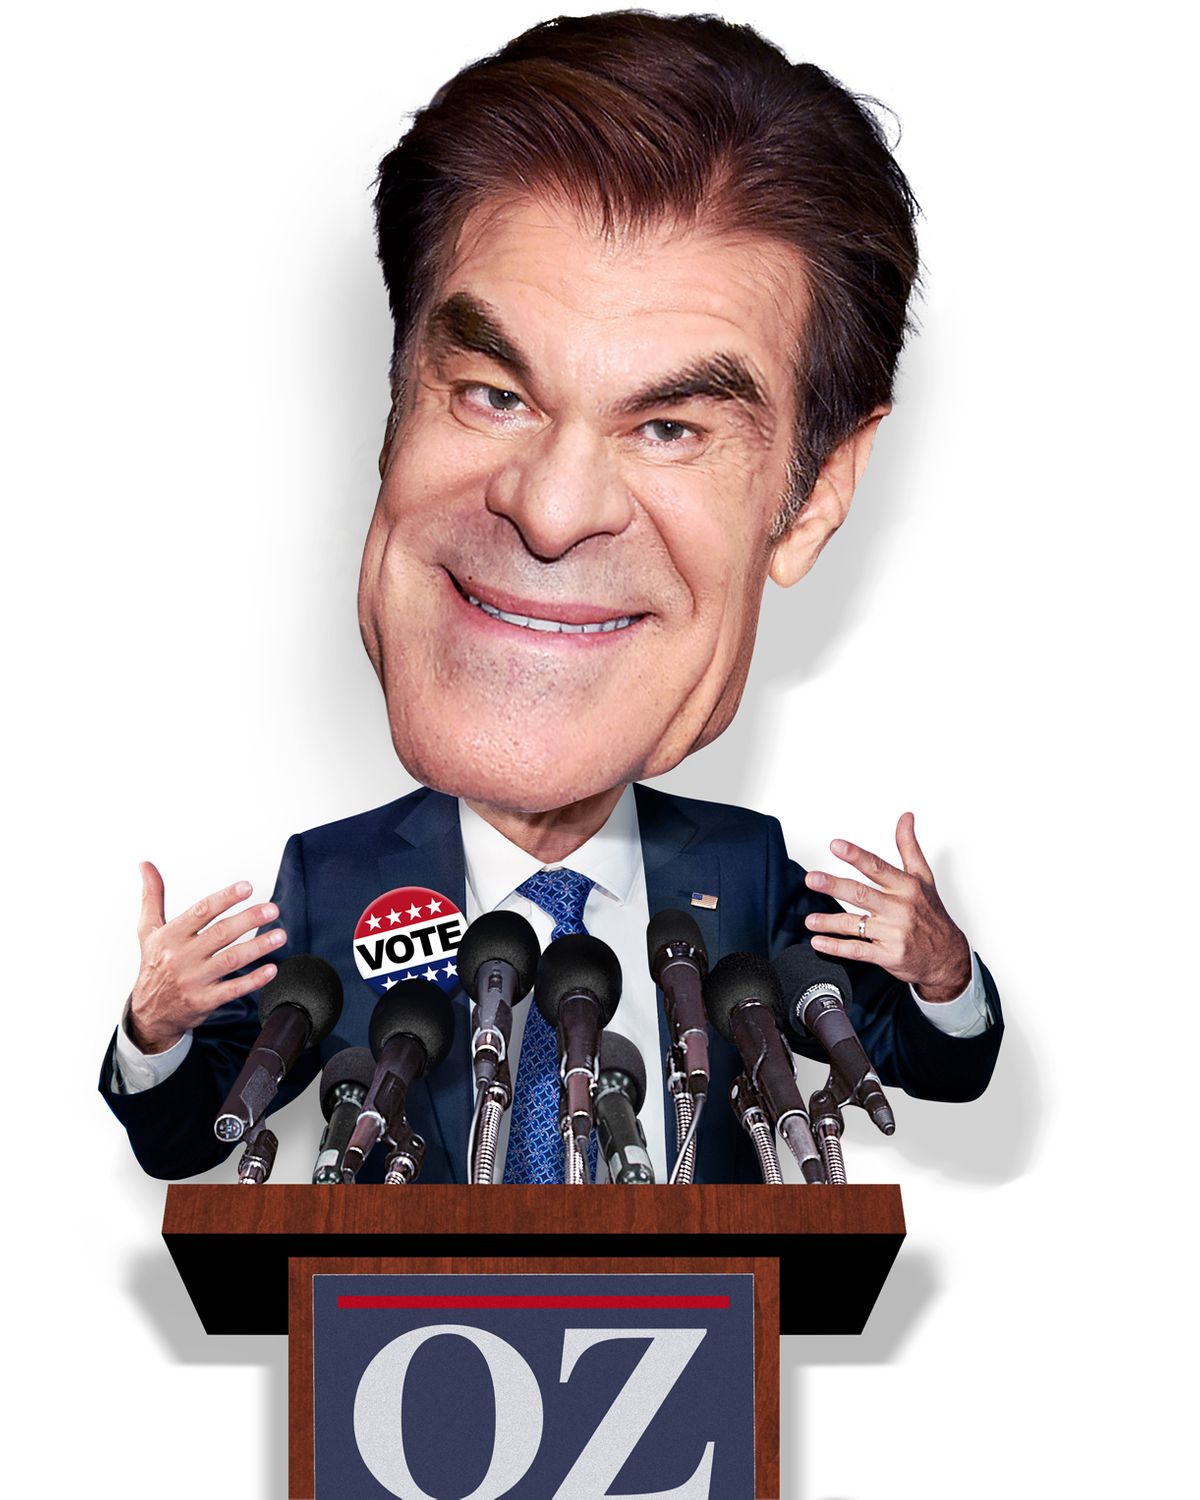 The Life of Dr. Oz, Who's Running Senate